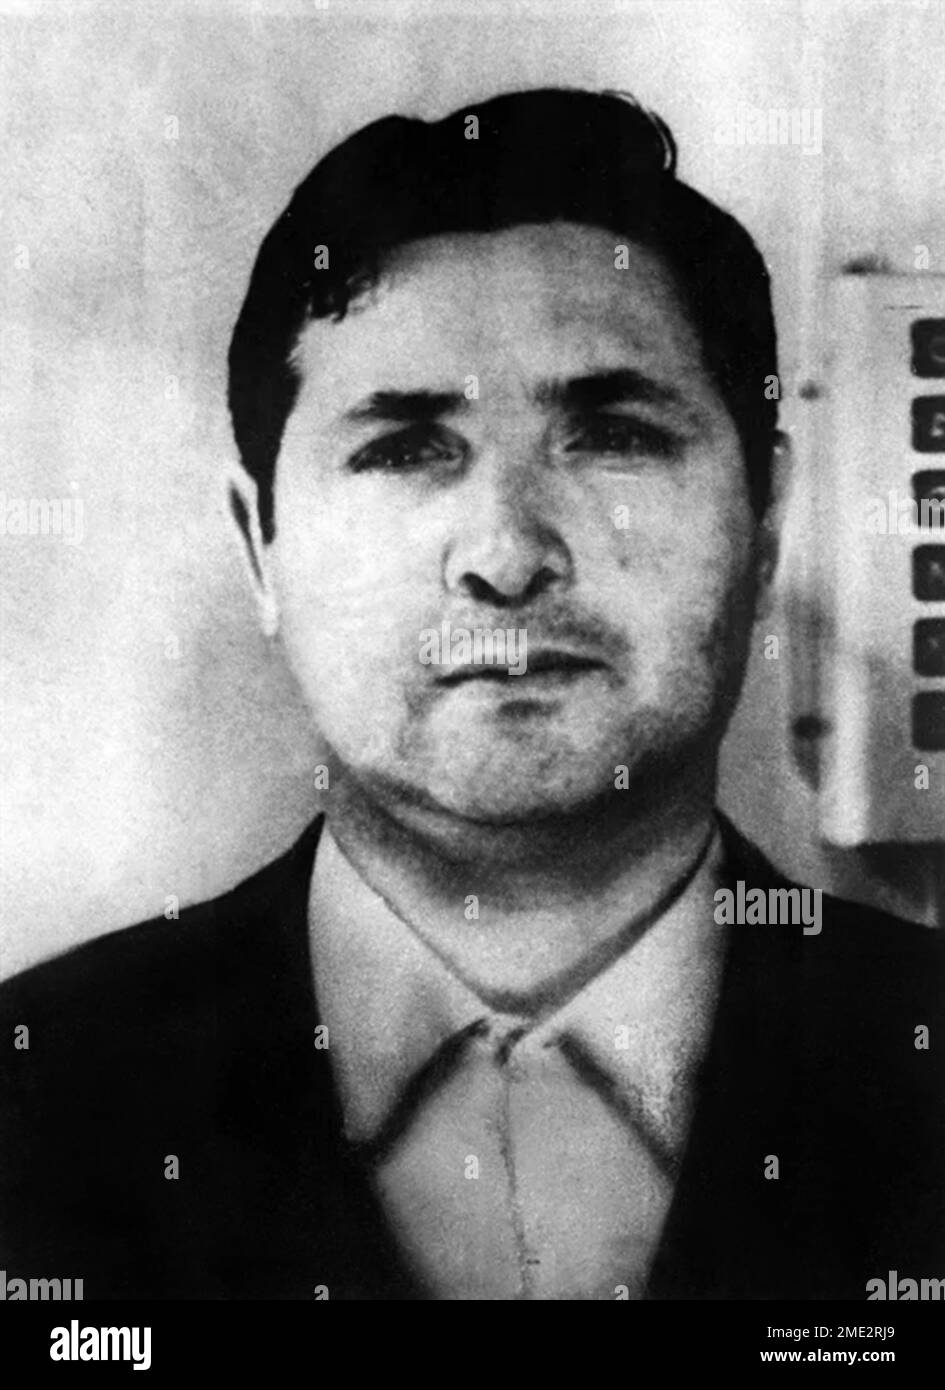 1960 ca, Corleone,  ITALY : The Mafia Boss SALVATORE Totò RIINA ( 1930 - 2017 ), aka U CURTU of Clan dei Corleonesi , italian COSA NOSTRA Mafioso . Was a Sicilian Mafia boss from Corleone ( Palermo ) . Author of hundreds of murders from the 70s to the 90s, as well as being directly responsible for some of the most serious bloodshed of Cosa Nostra . Was married with Antonietta Bagarella , sister of mafioso Leoluca Bagarella ( born 3 february 1942 ). In this image a photoboth mugshot diffused by the italian Police in 1960 ca when Riina was  young . Unknown photographer . DIGITALLY RESTORED . - Stock Photo